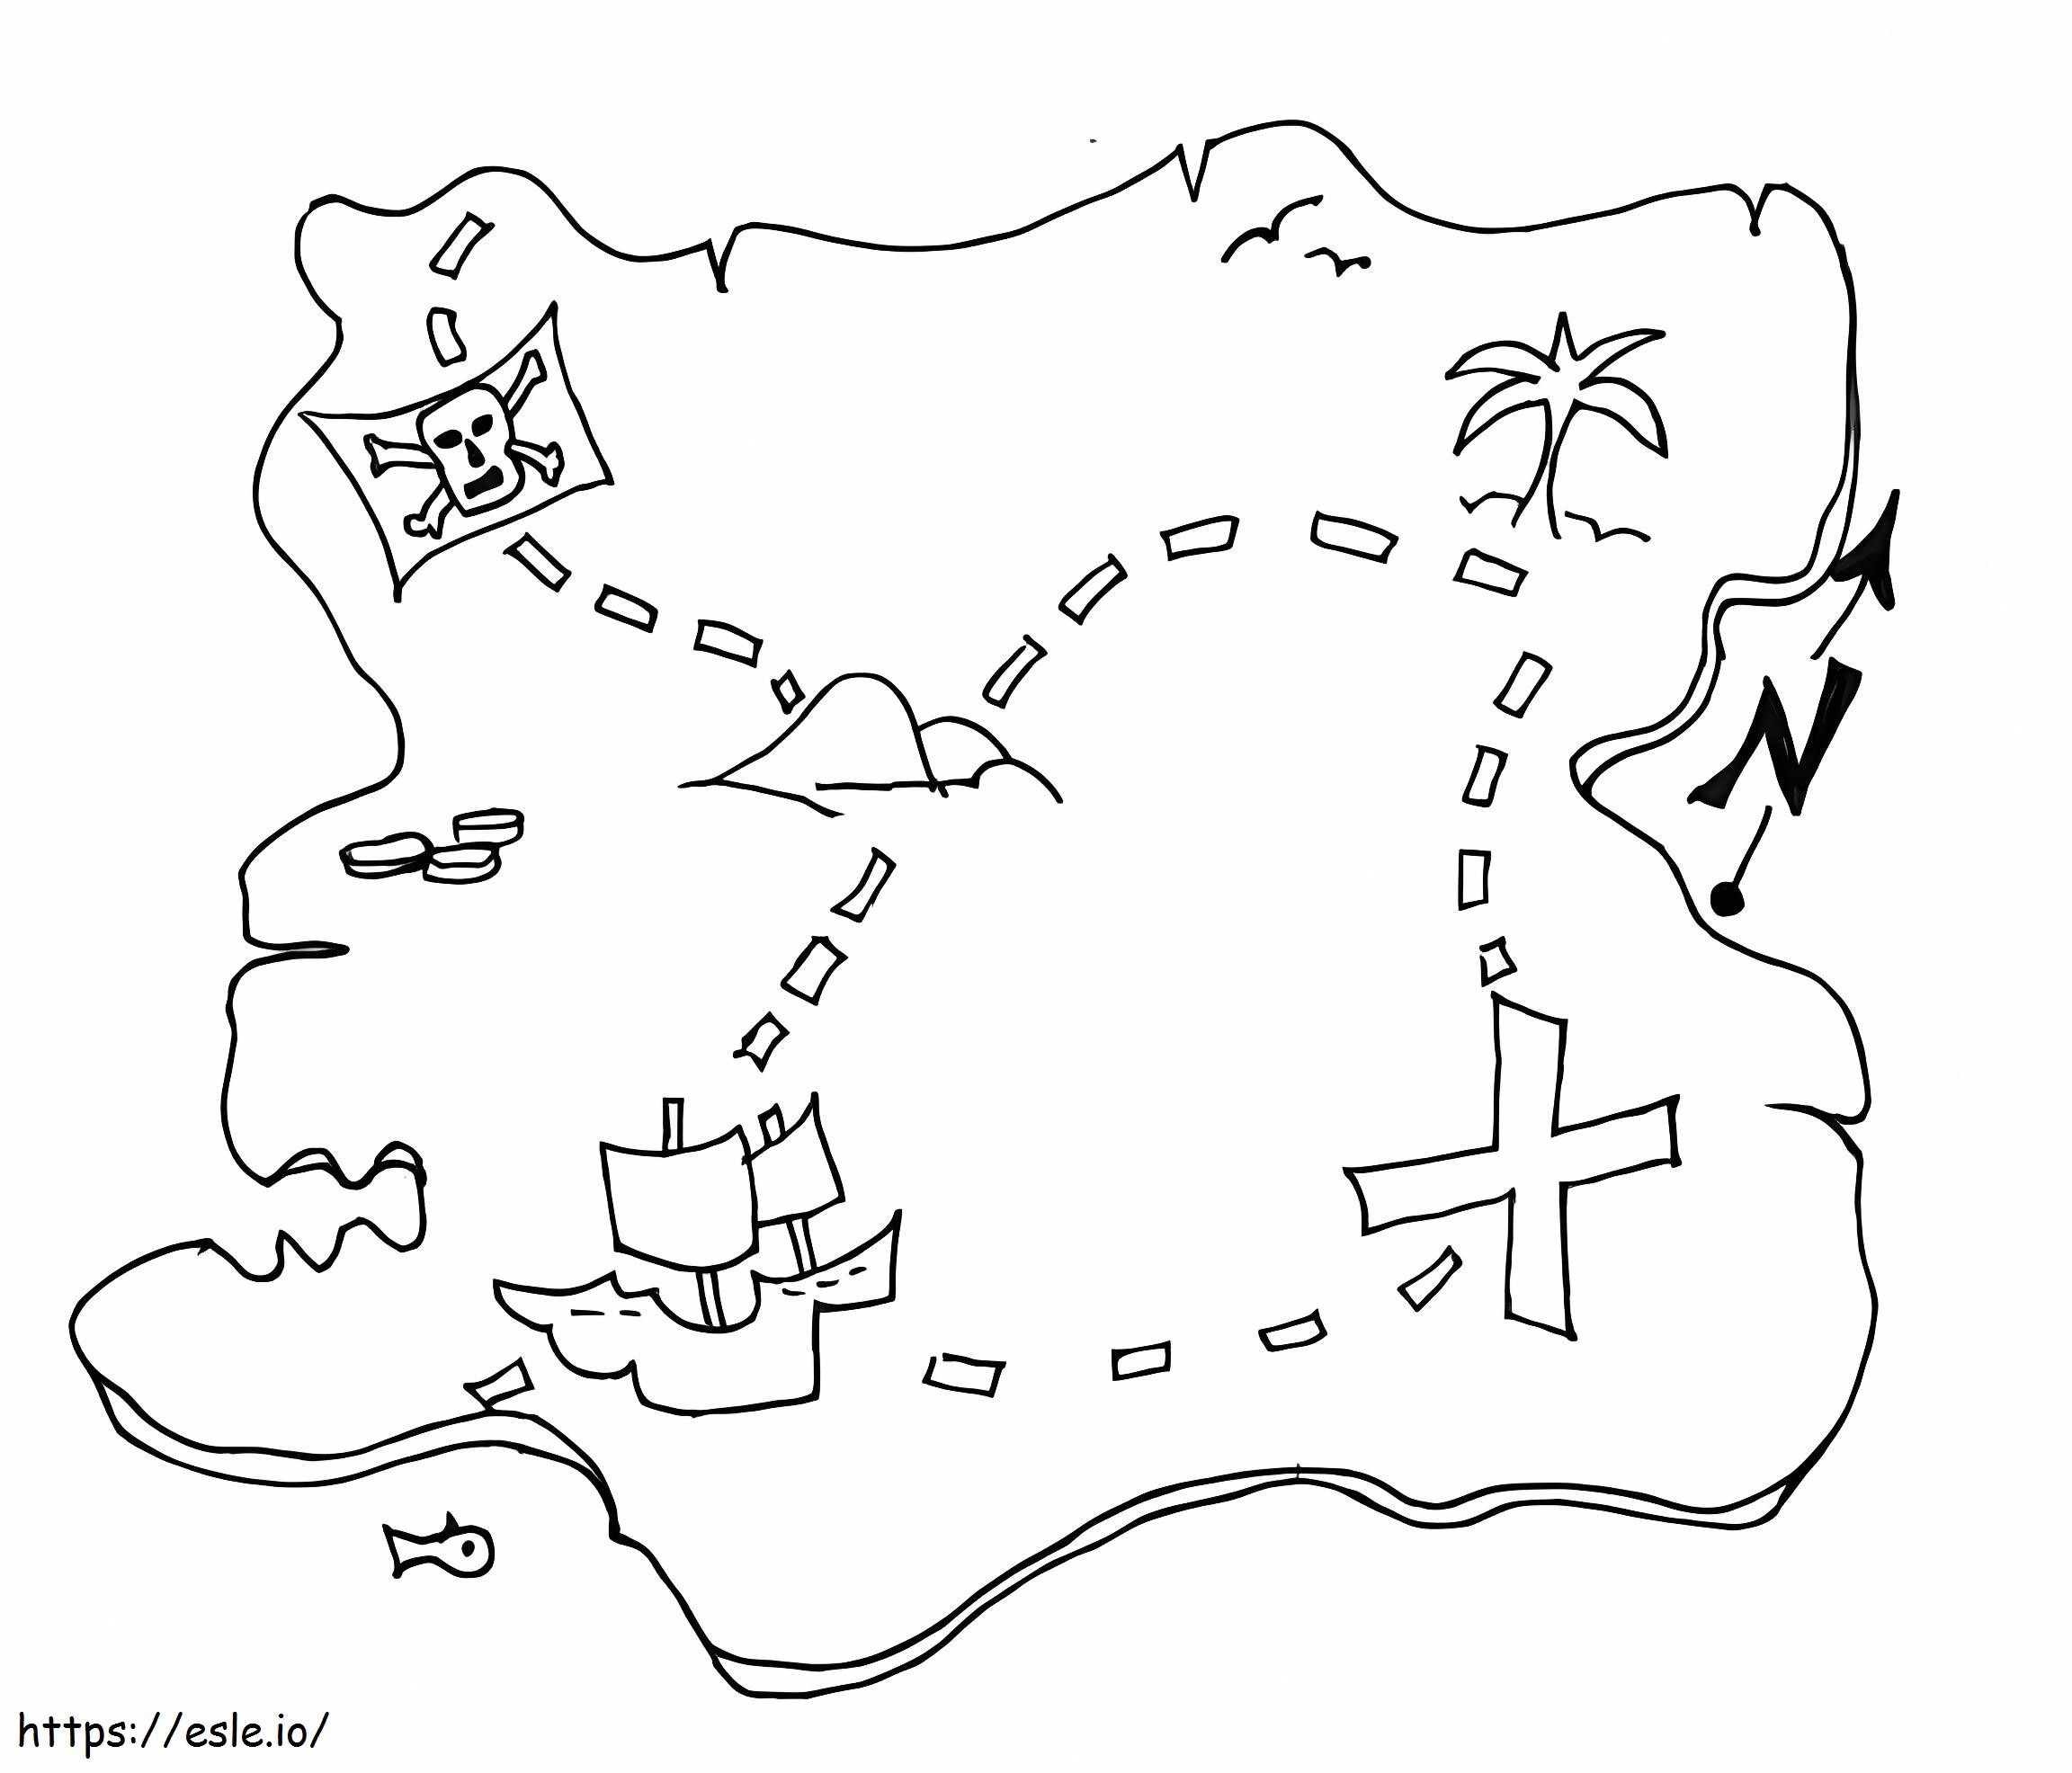 Free Treasure Map To Print coloring page